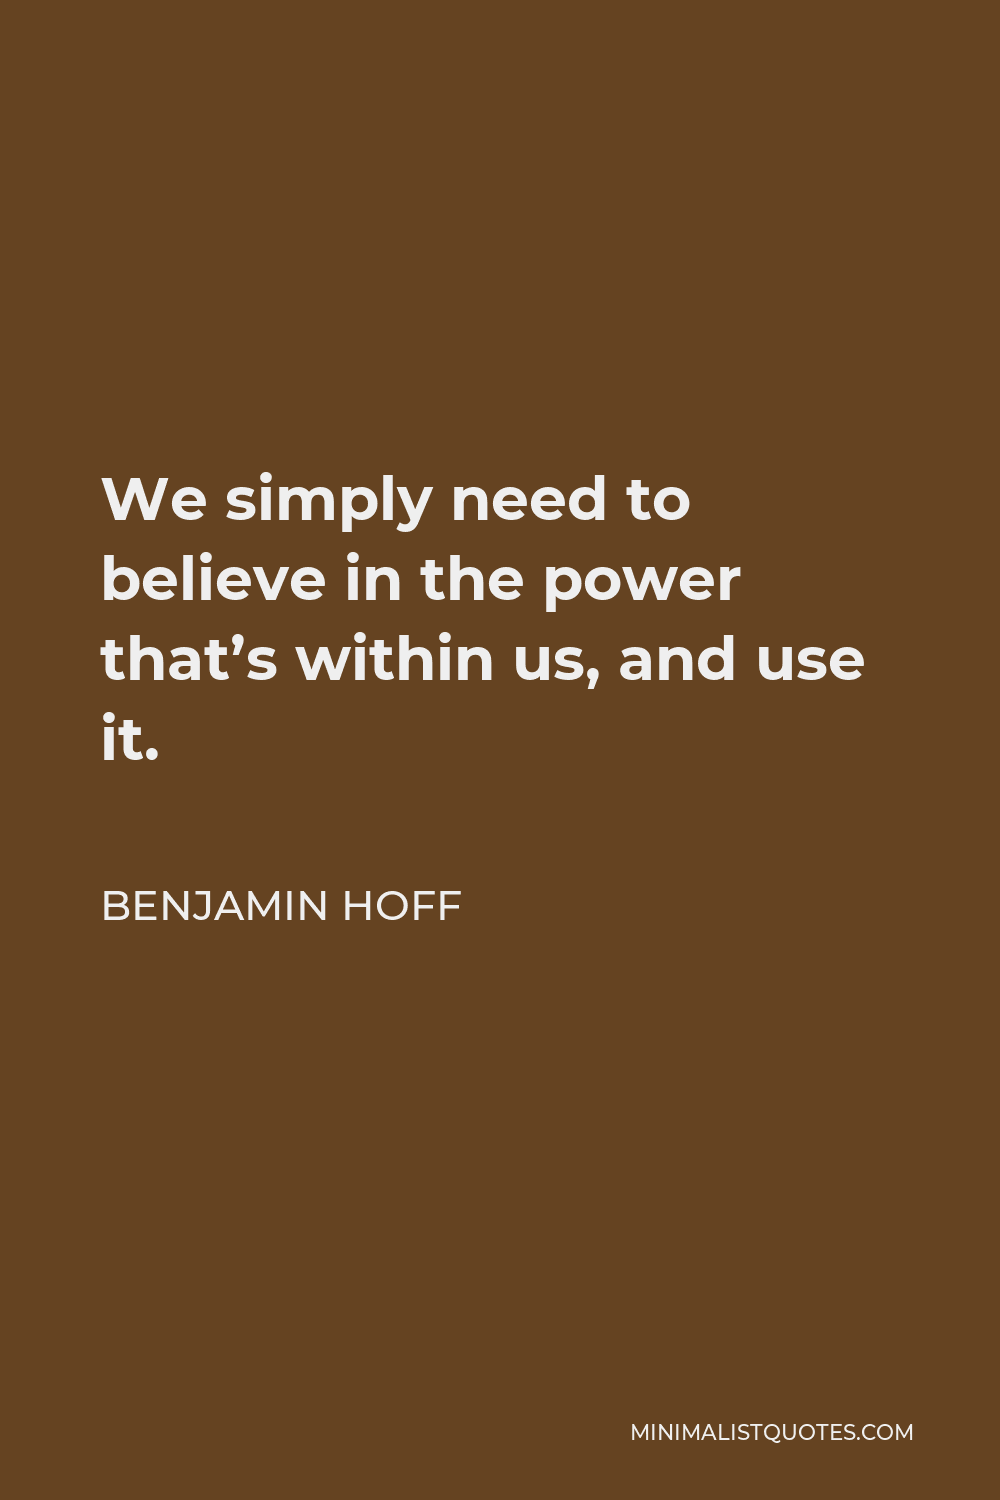 Benjamin Hoff Quote - We simply need to believe in the power that’s within us, and use it.